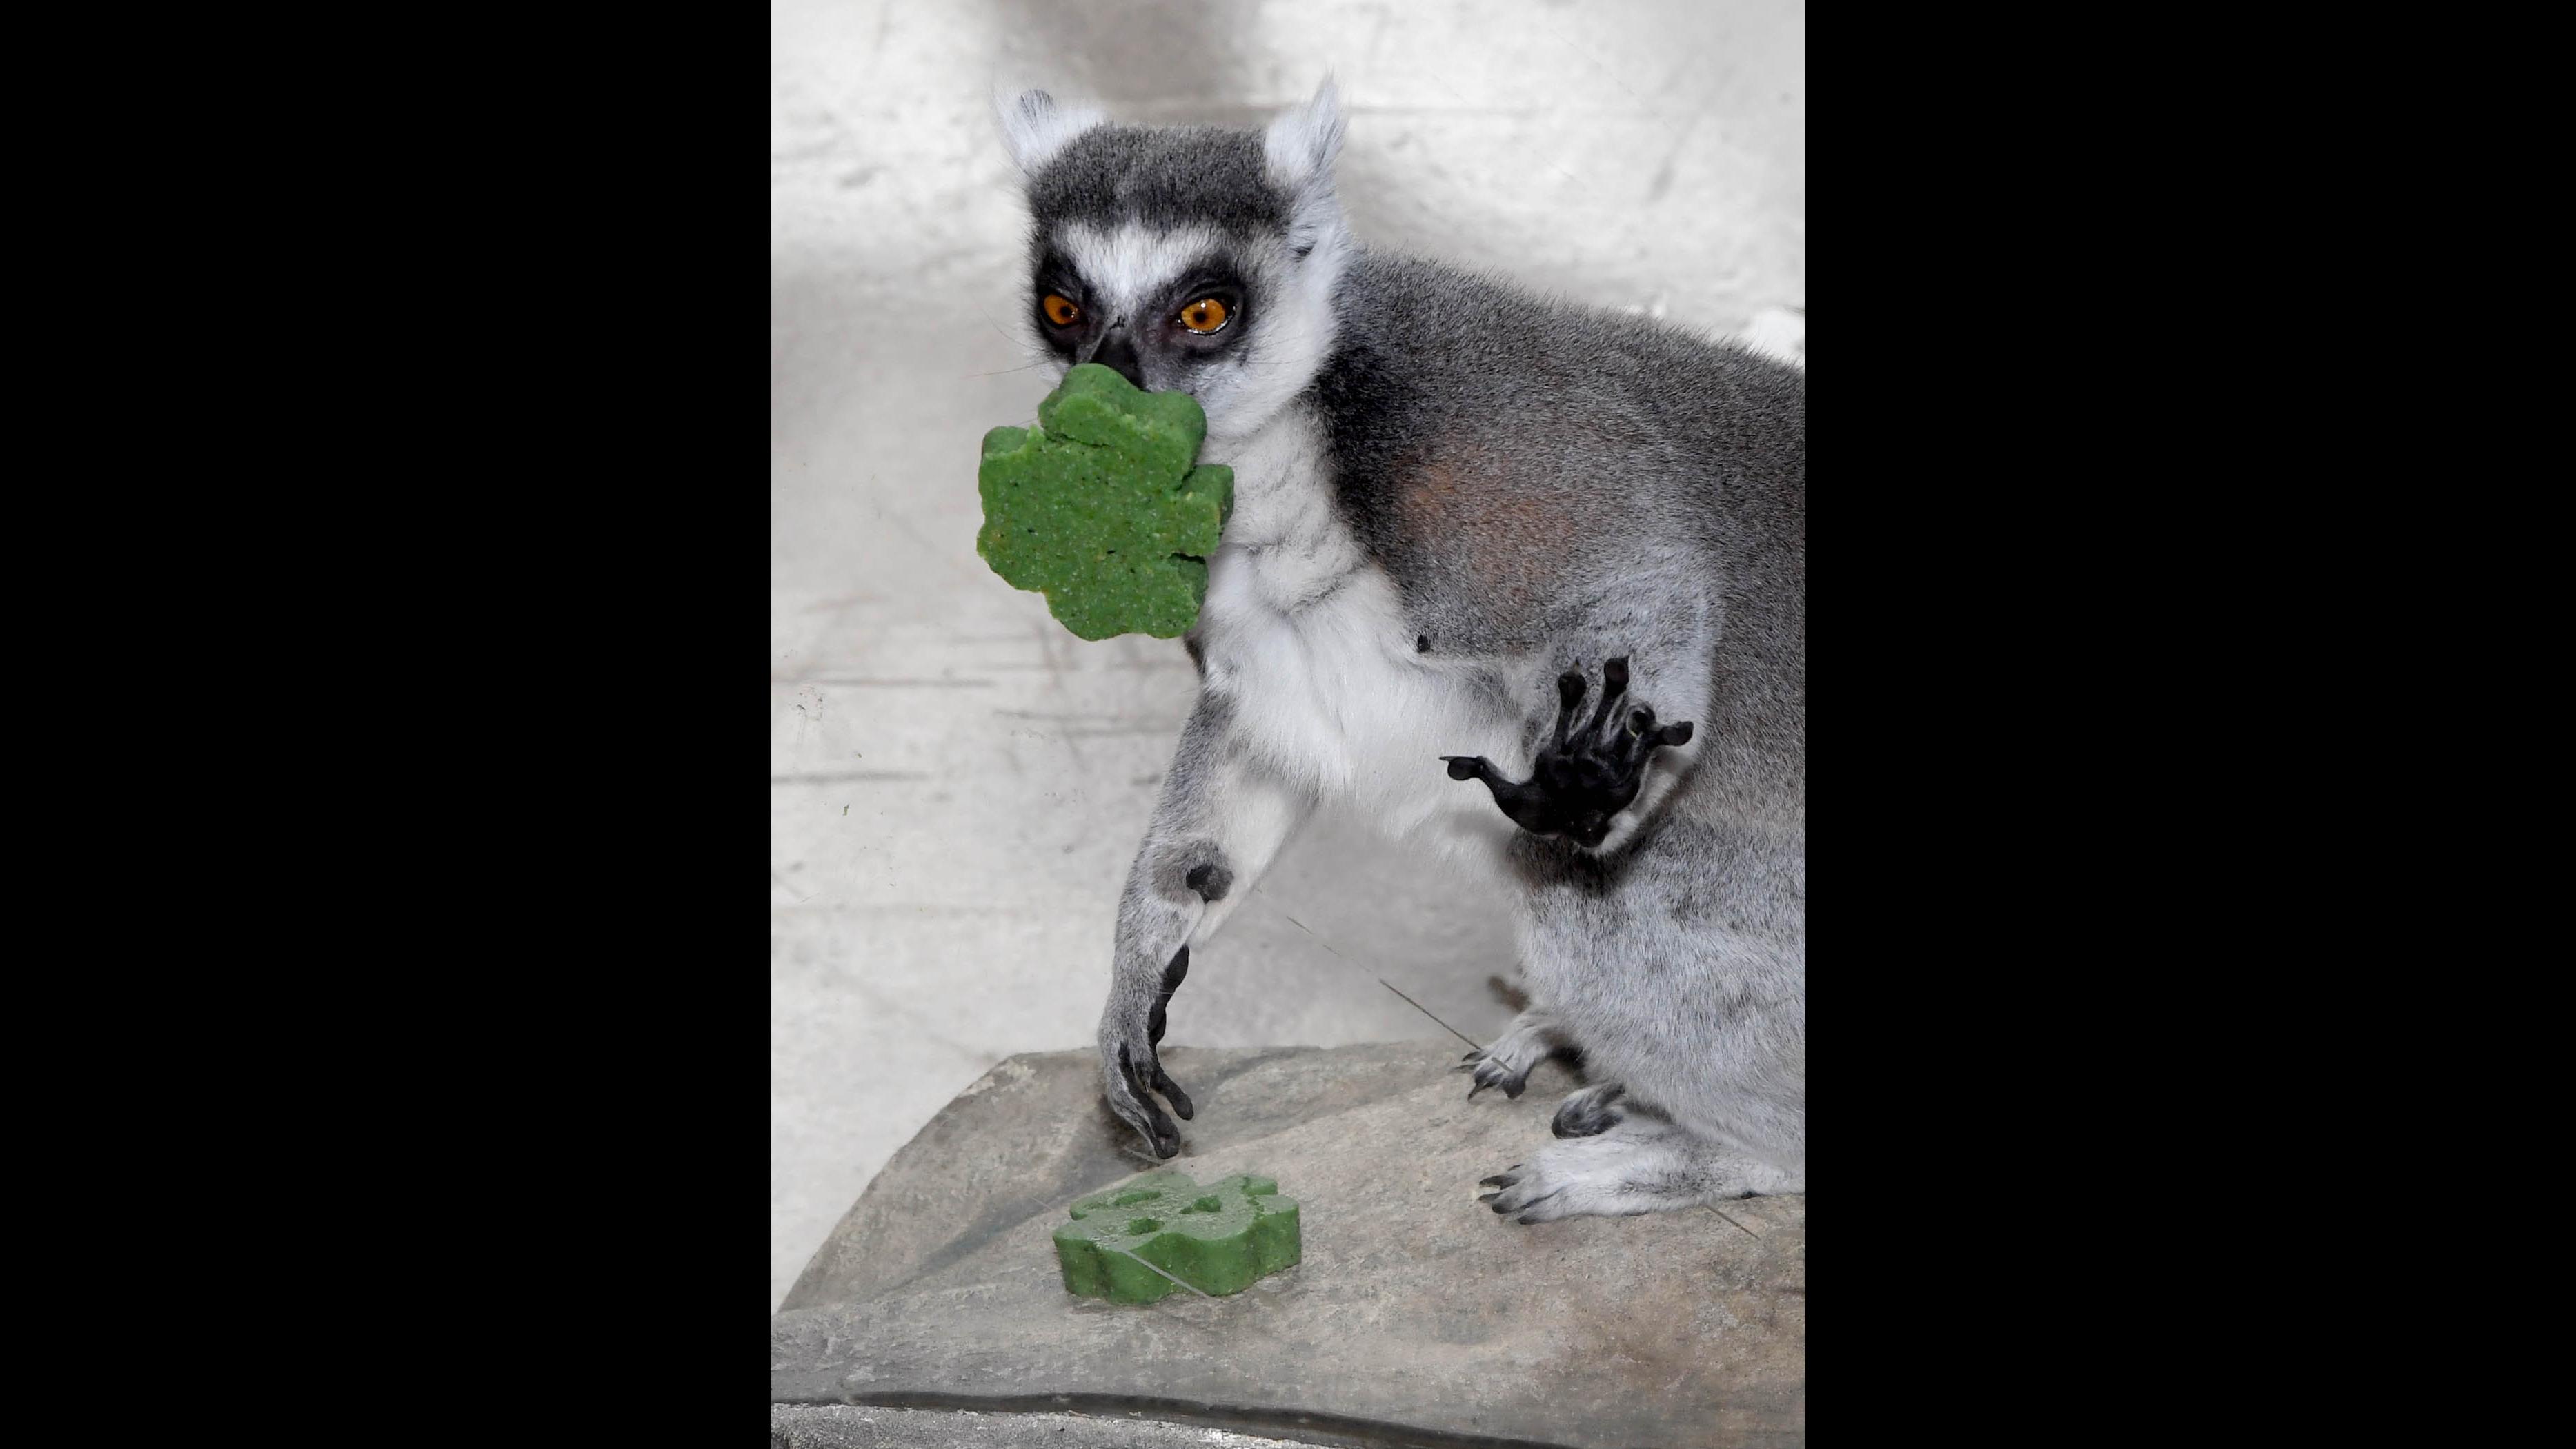 Ramses, a ring-tailed lemur at Brookfield Zoo, looks at a shamrock-shaped treat prepared by animal care staff. (Jim Schulz / Chicago Zoological Society)